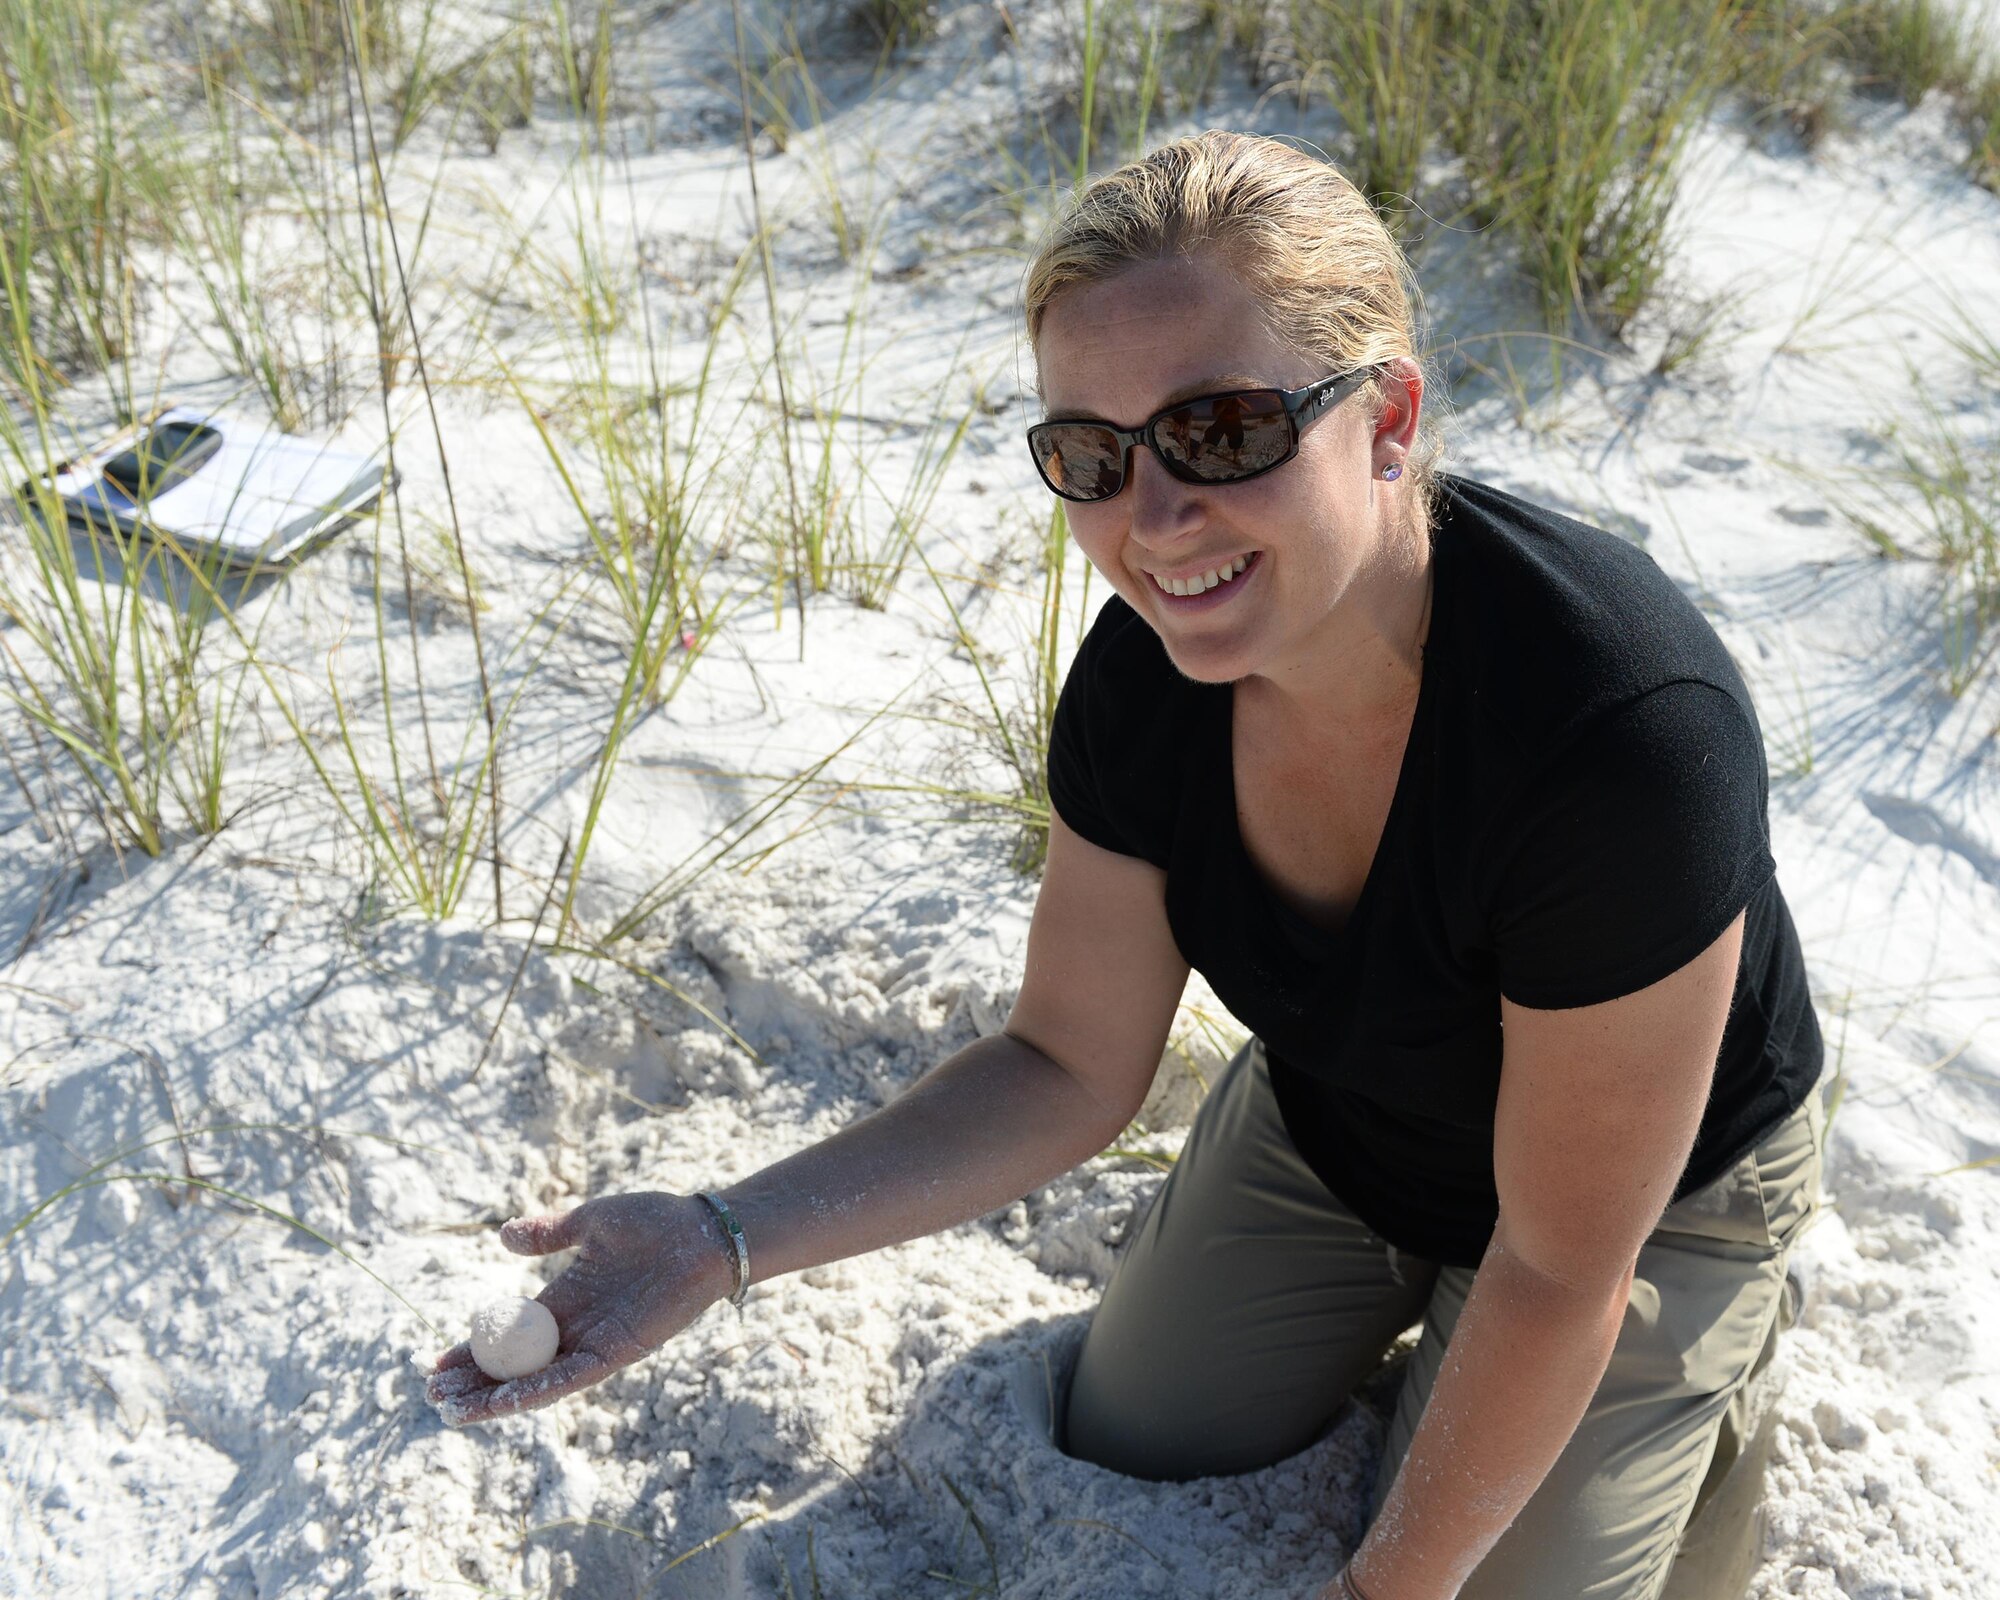 Danielle Bumgardner, 325th Civil Engineer Squadron Environmental Flight biologist, finds a turtle egg at Tyndall Air Force Base, Fla., June 22, 2016. Onshore threats to eggs and hatchlings include ghost crabs, coyotes, raccoons, opossums, dogs, feral cats, seagulls, wading birds, crows, eagles and egg poachers. Biologists like Bumgardner find and protect the turtle nests to ensure the hatchlings have a chance to make it to adulthood. (U.S. Air Force photo by Airman 1st Class Cody R. Miller/Released)